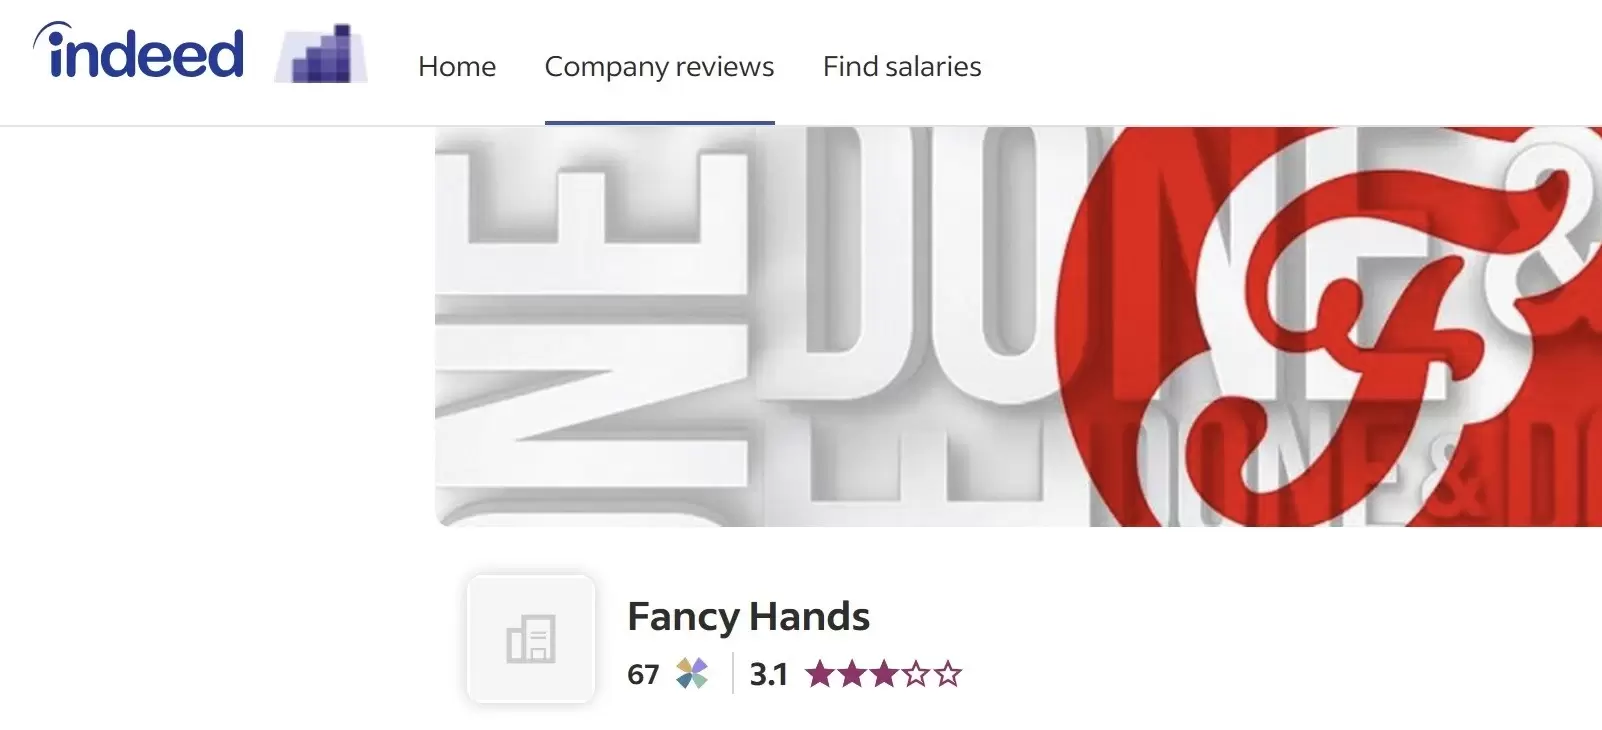 Fancy Hands on Indeed